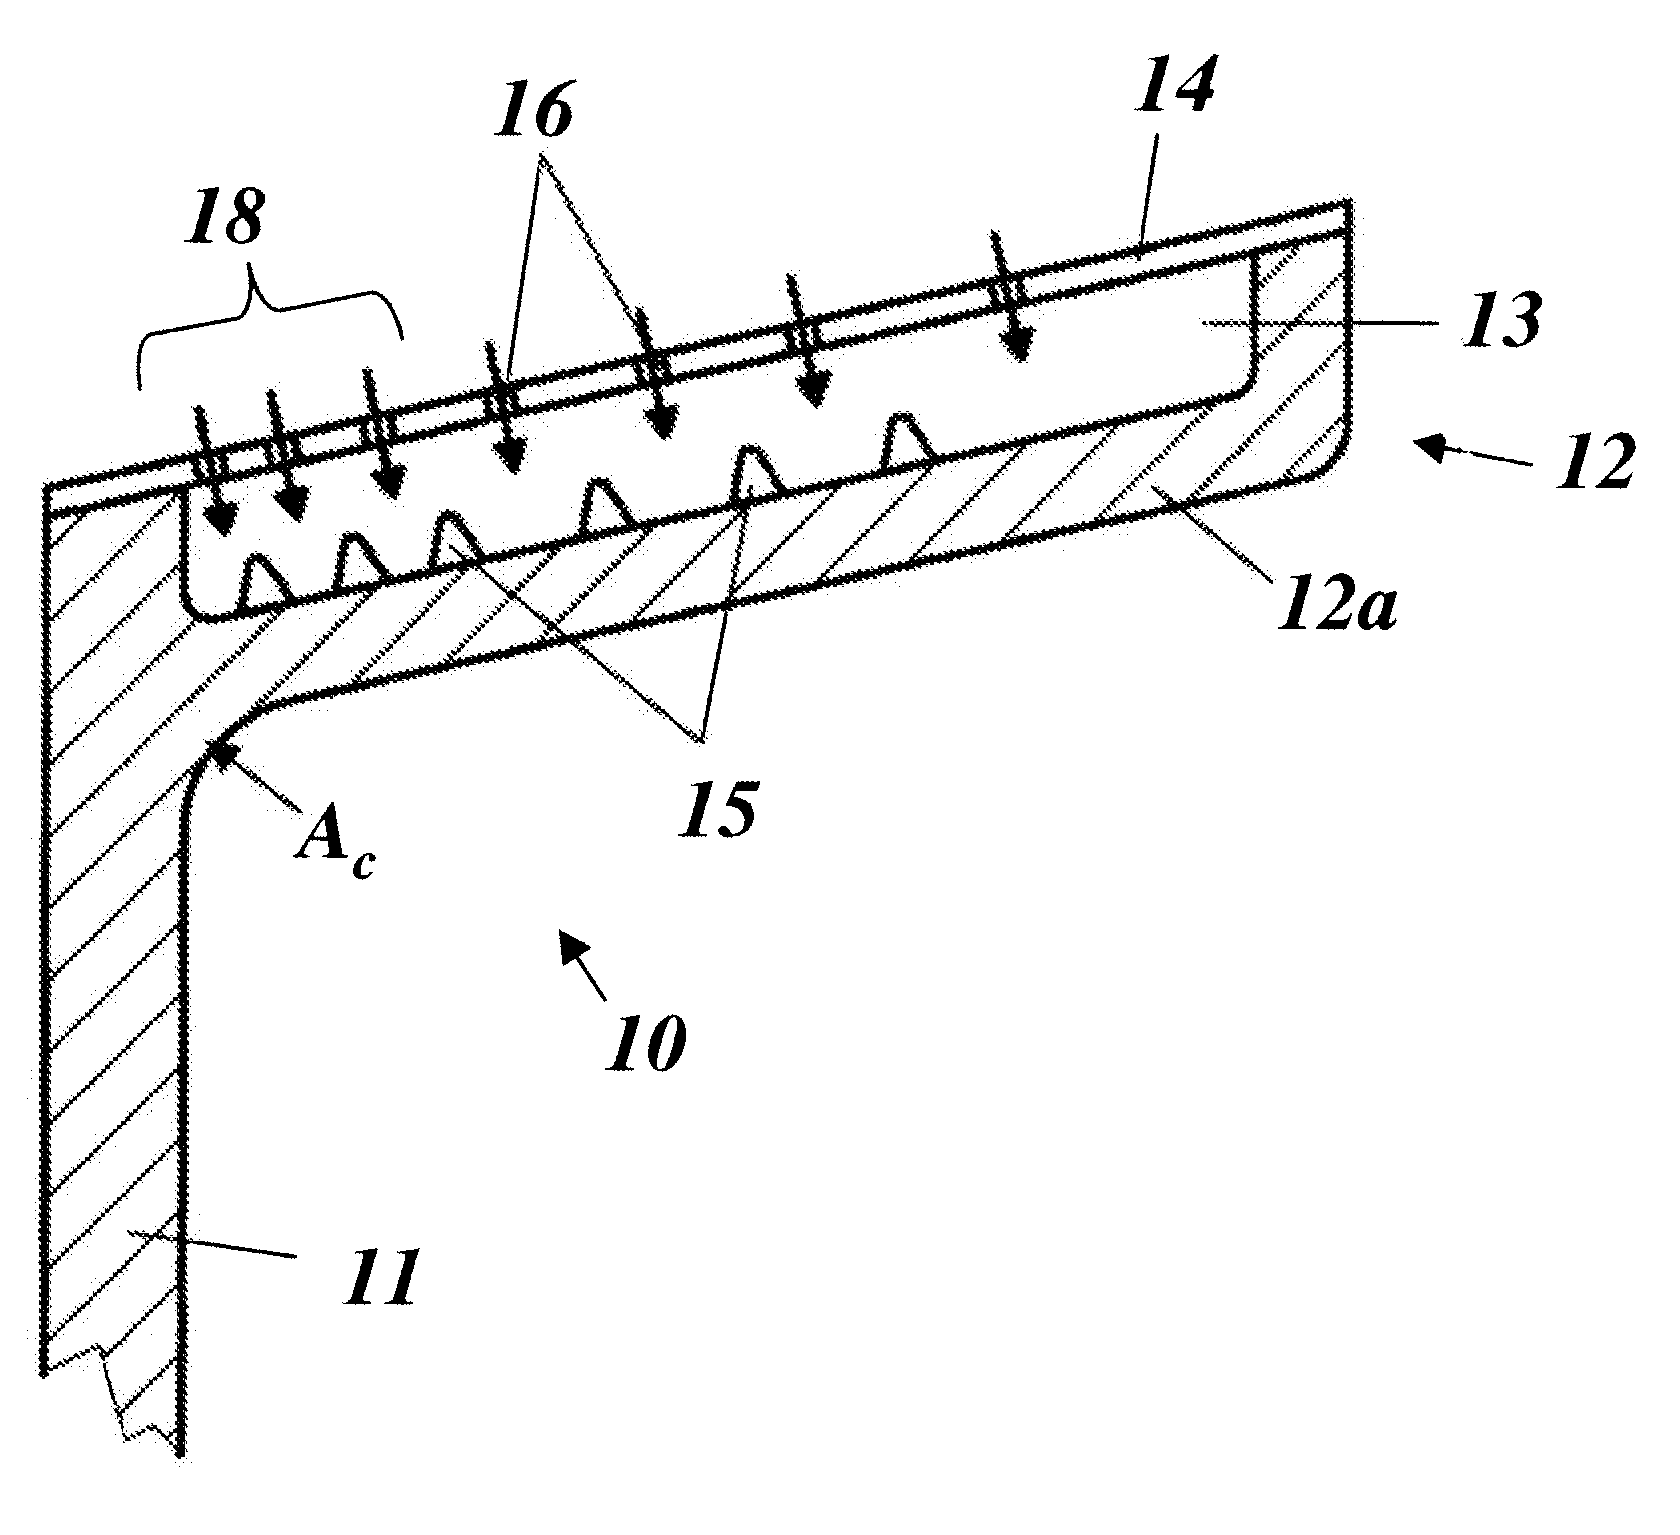 Cooled constructional element for a gas turbine